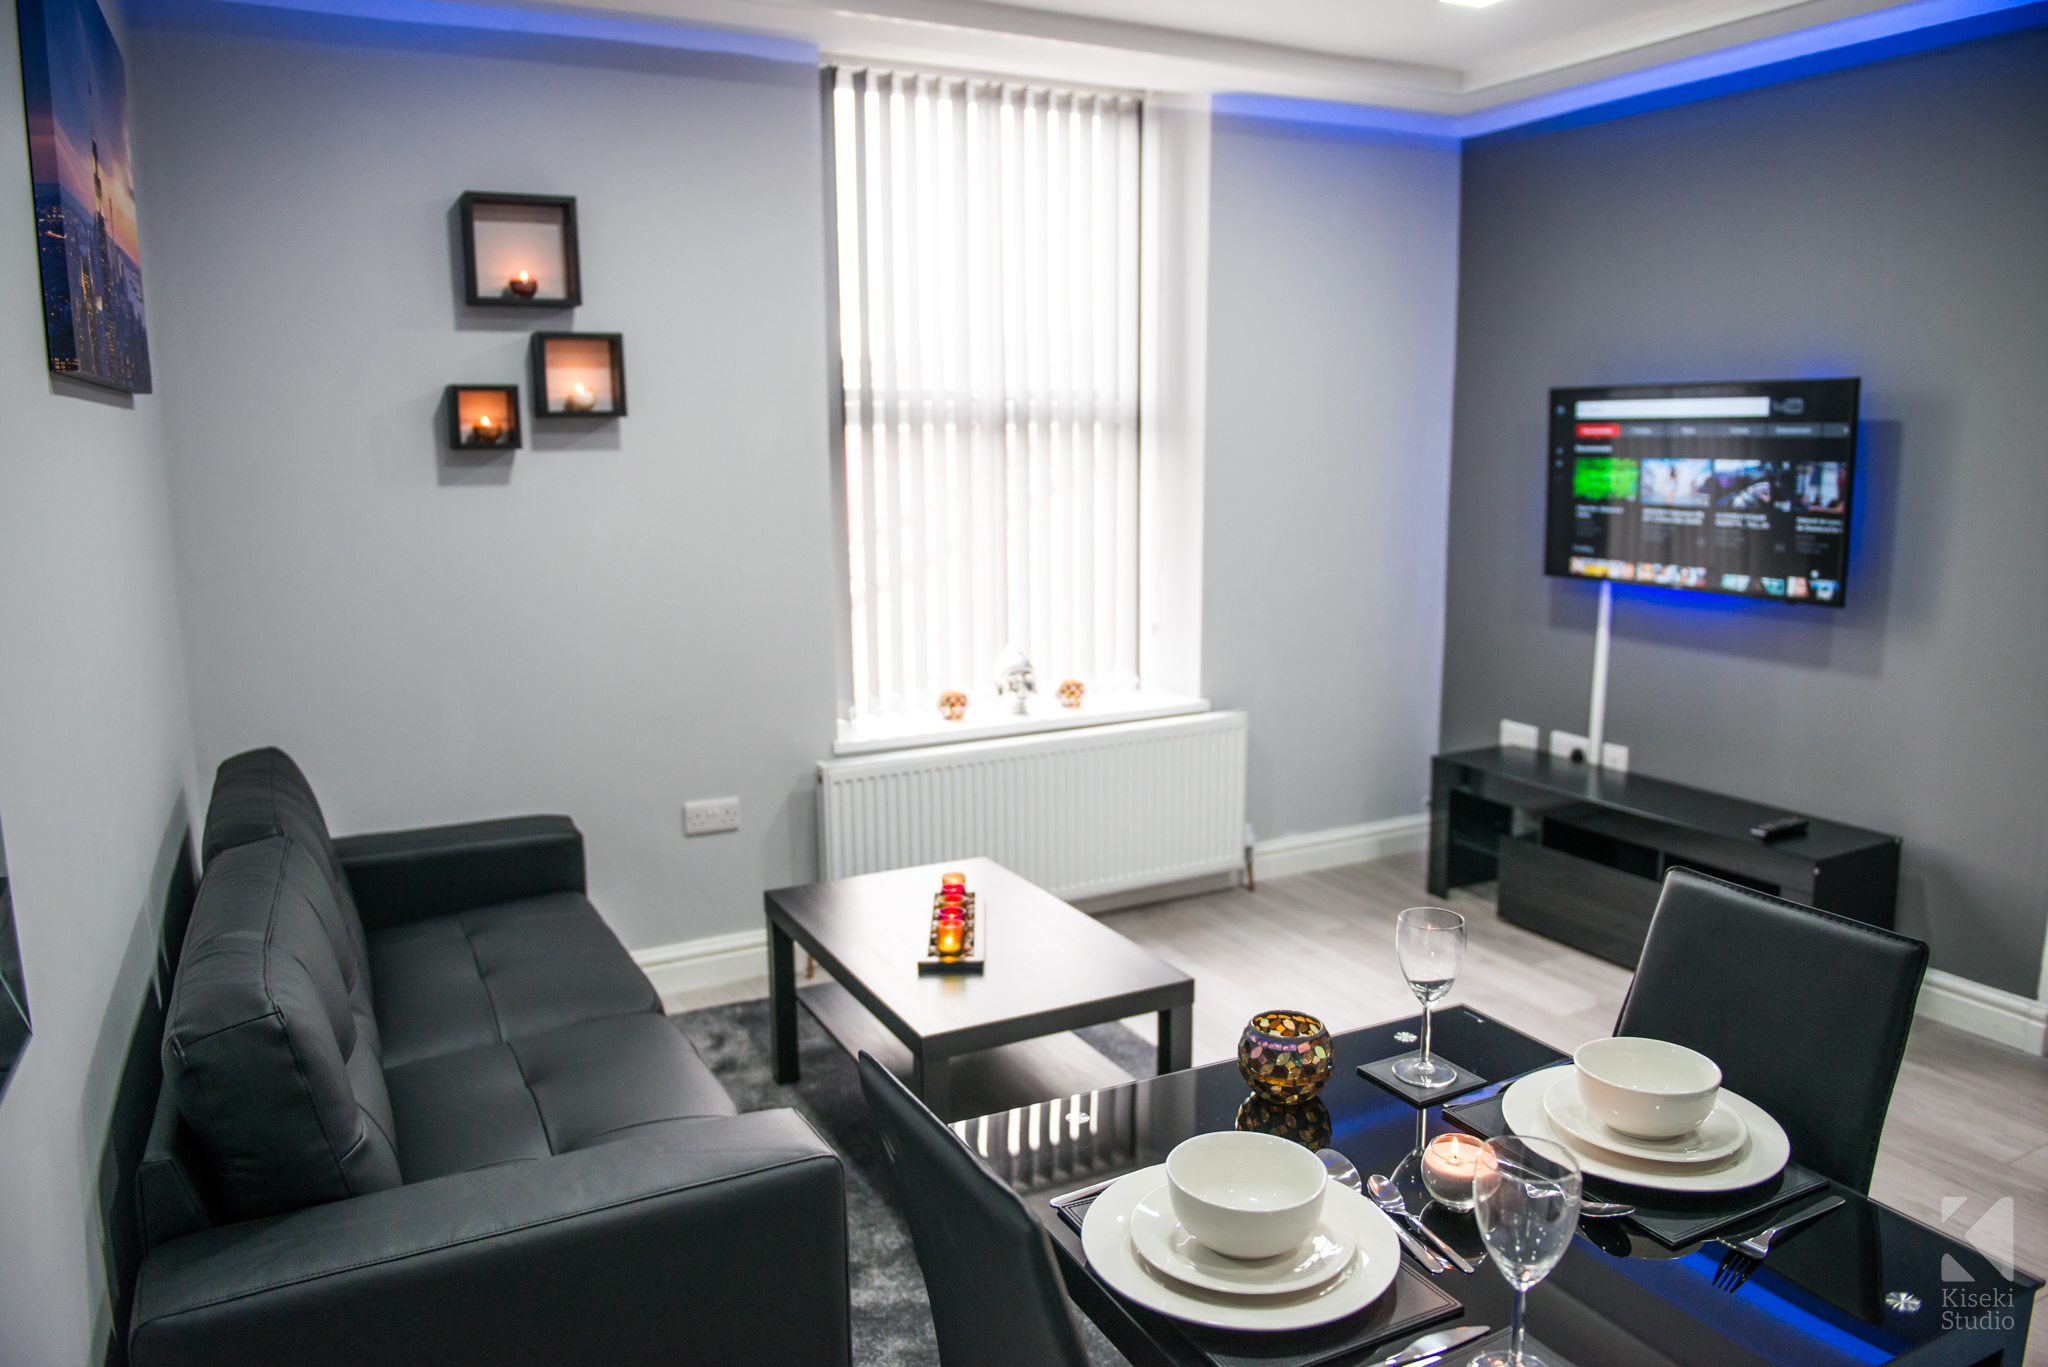 meridian-apartments-bradford-commerical-professional-photography-building-rental-serviced-dining